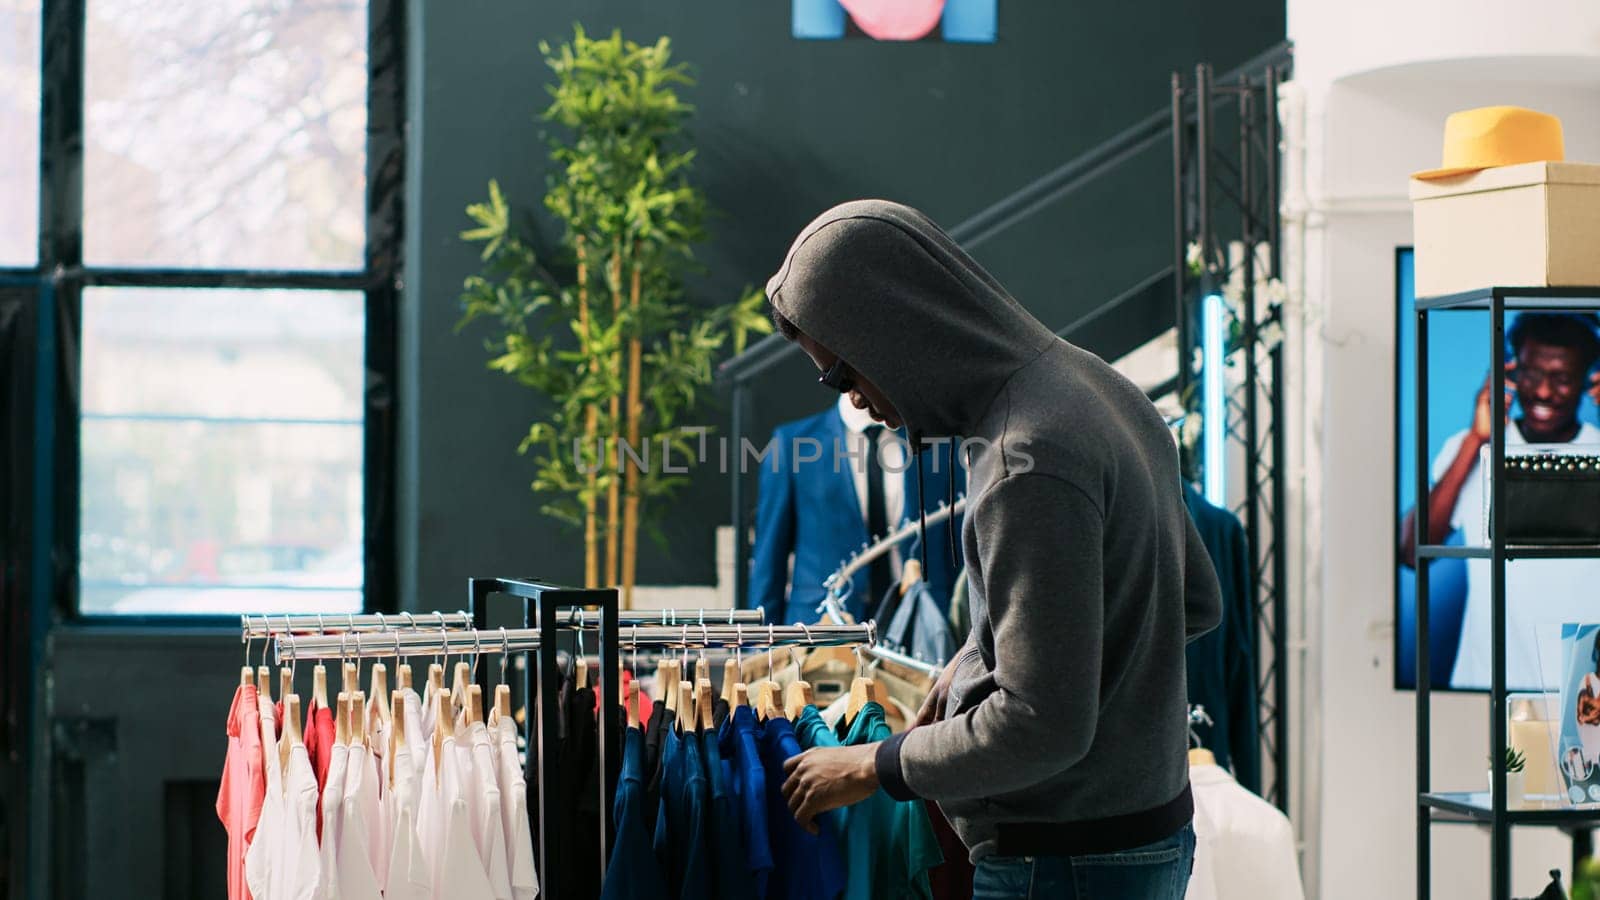 African american thief robbing clothing store, analyzing racks with stylish clothes. Robber trying to steal fashionable merchandise, wearing sunglasses and hood not to be recognized